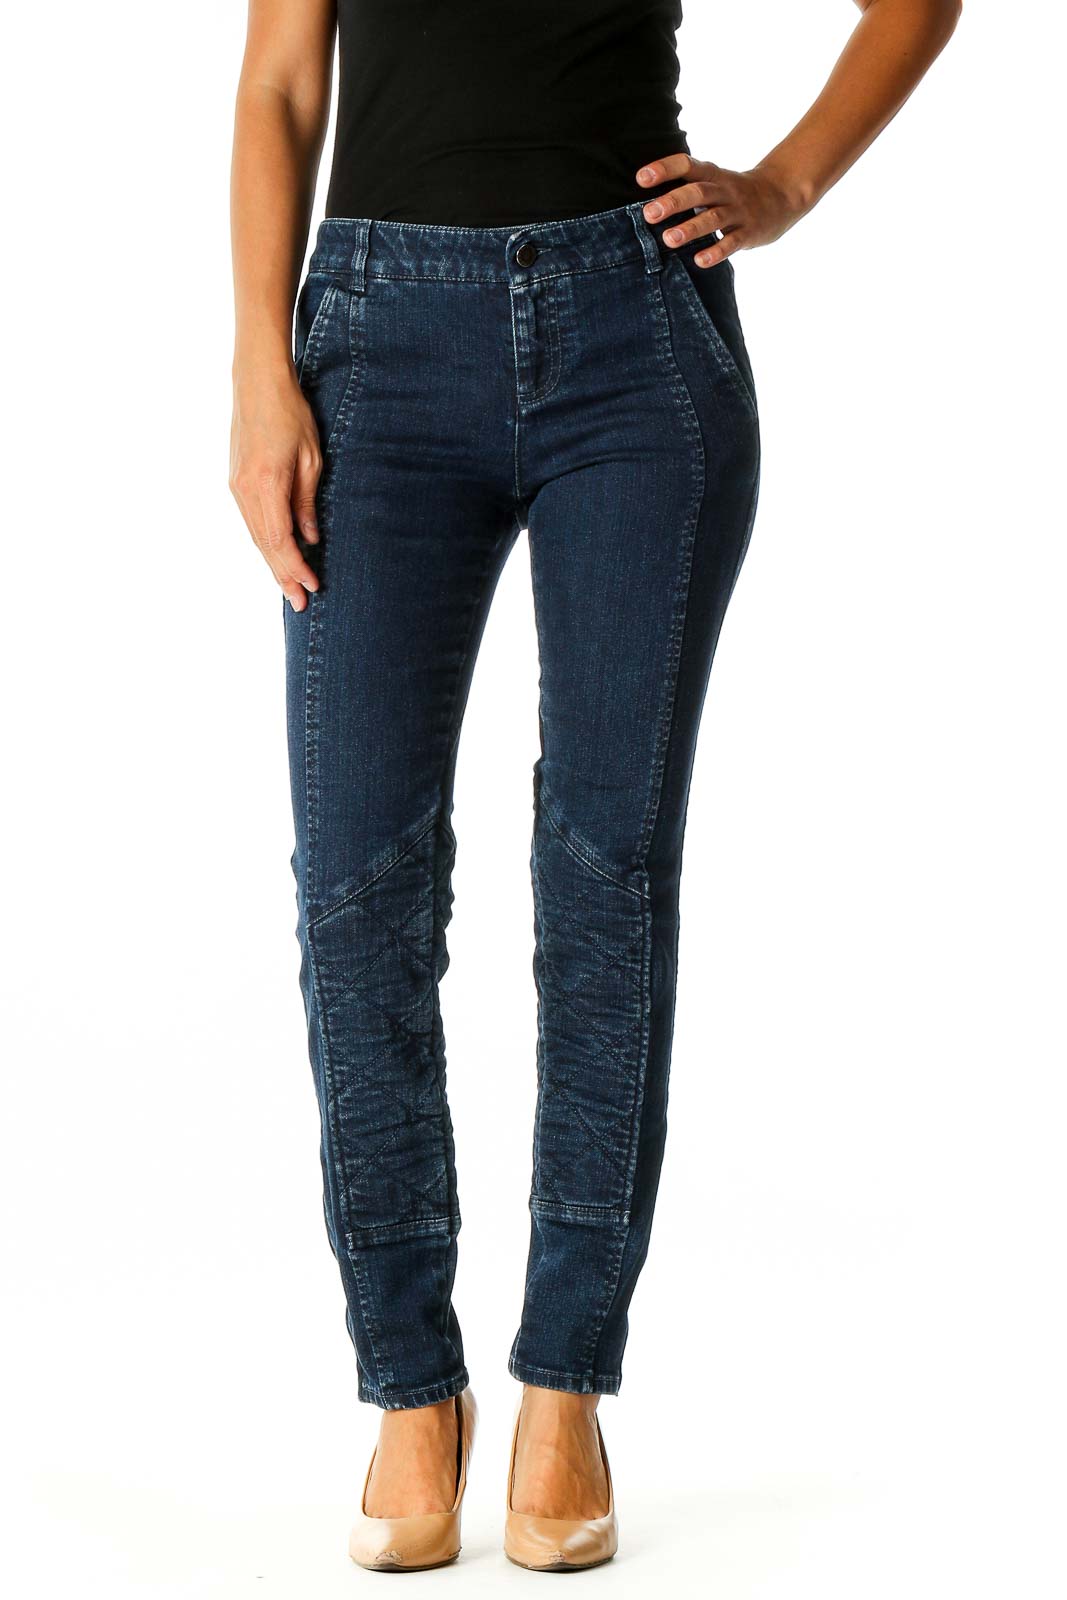 Blue Chic Skinny Jeans Front